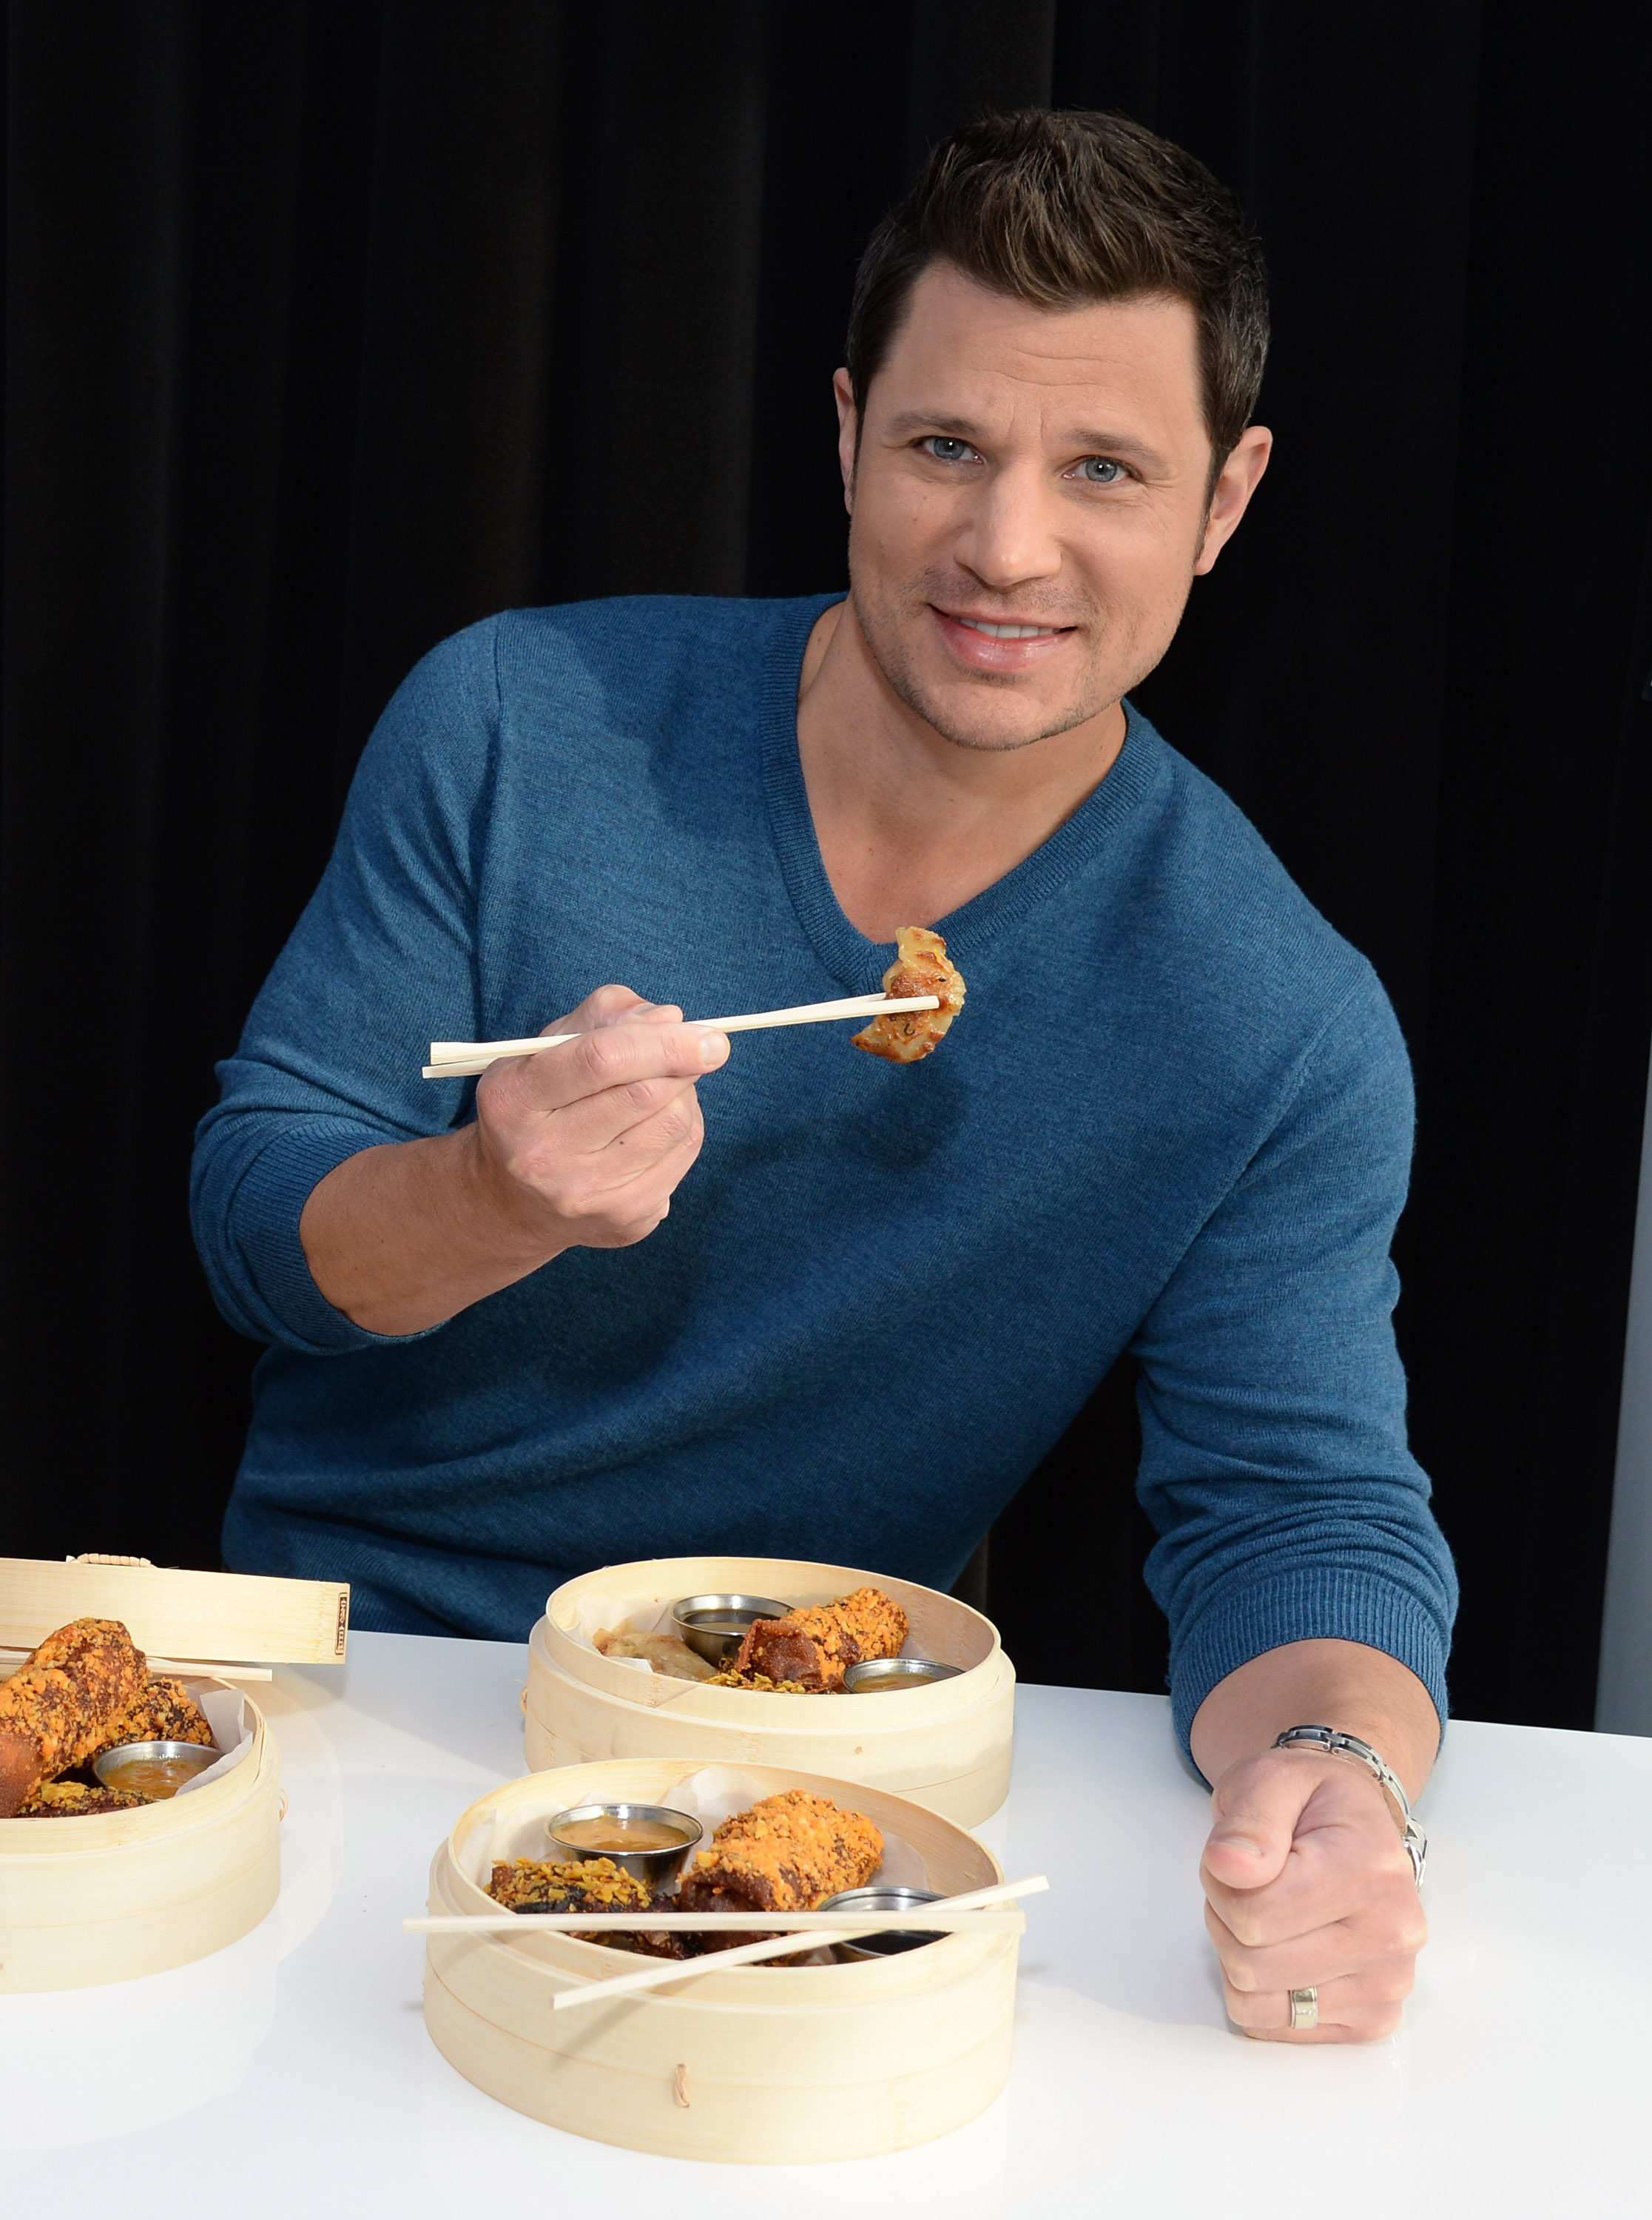 Nick Lachey opens up on his Super Bowl traditions - CBS News